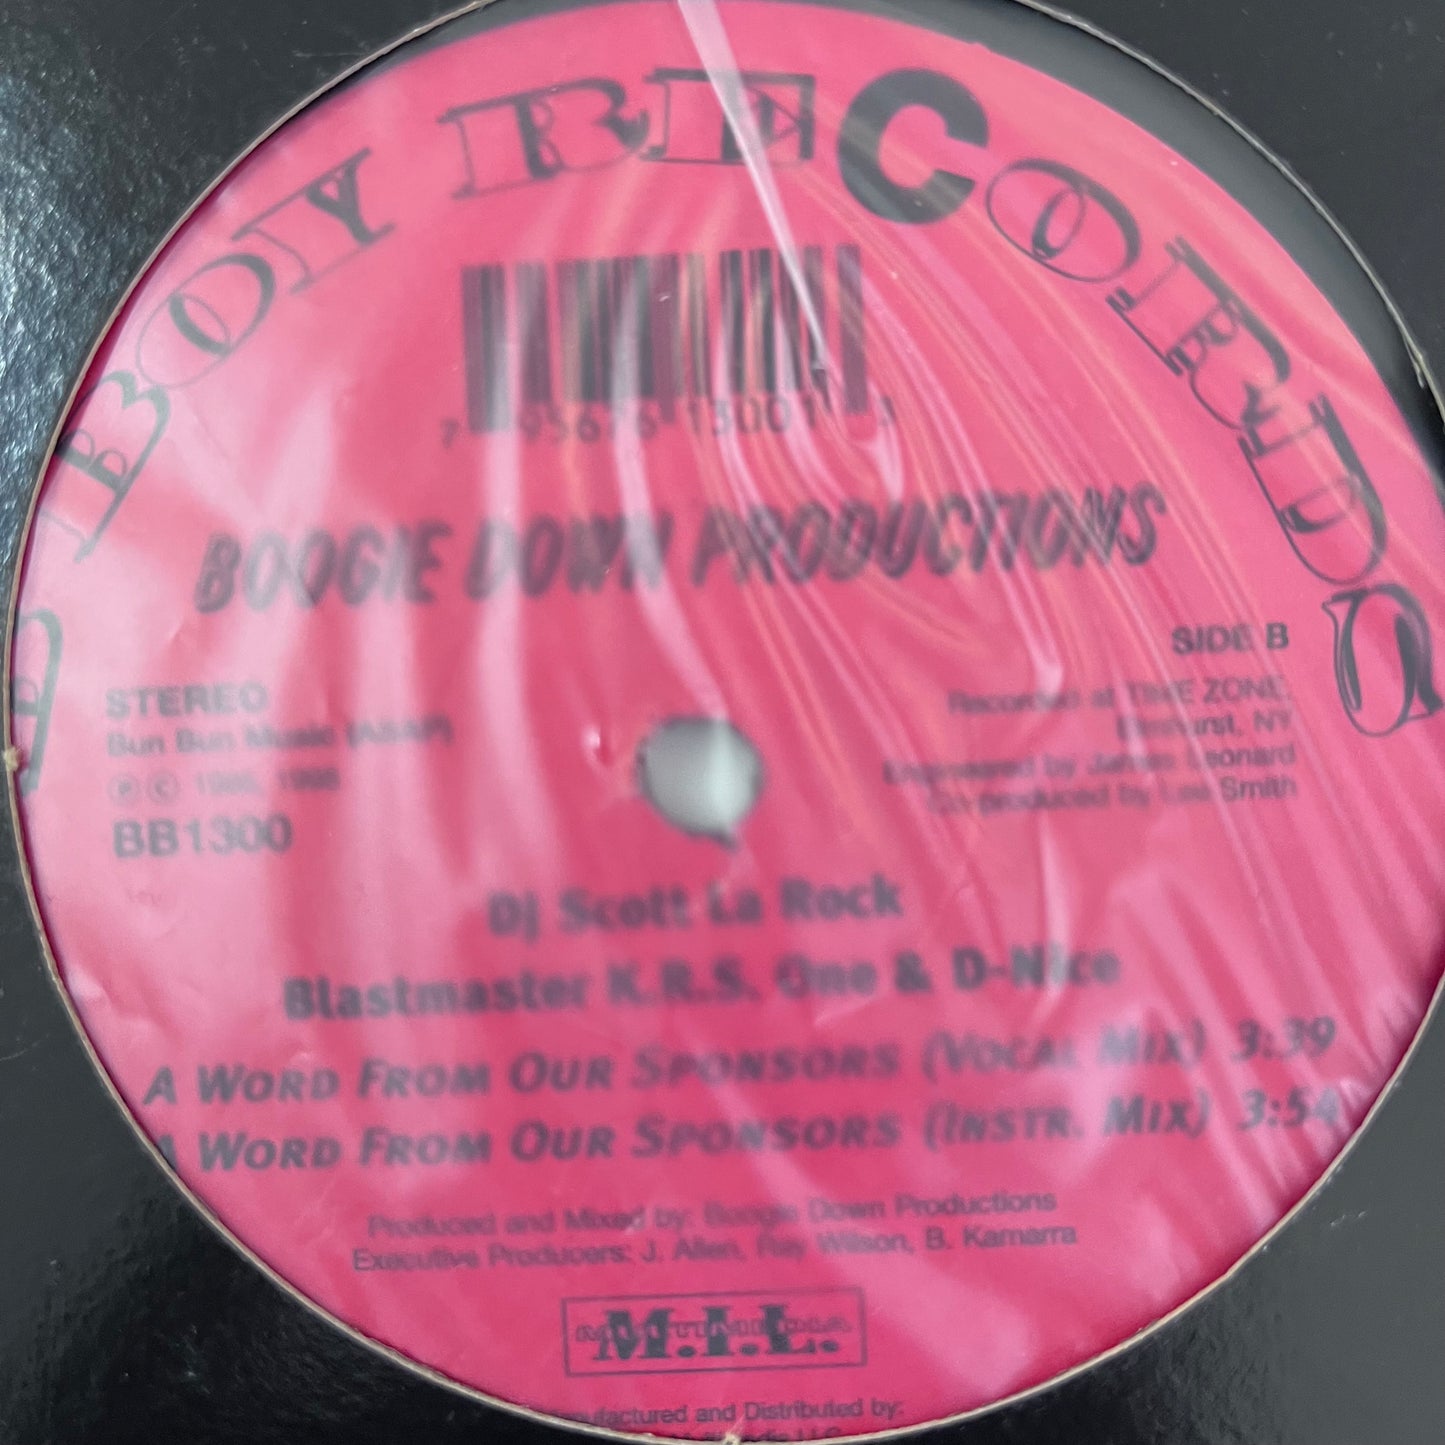 Boogie Down Productions “The Bridge Is Over” 2 Track 12inch Vinyl Record on B-Boy Records